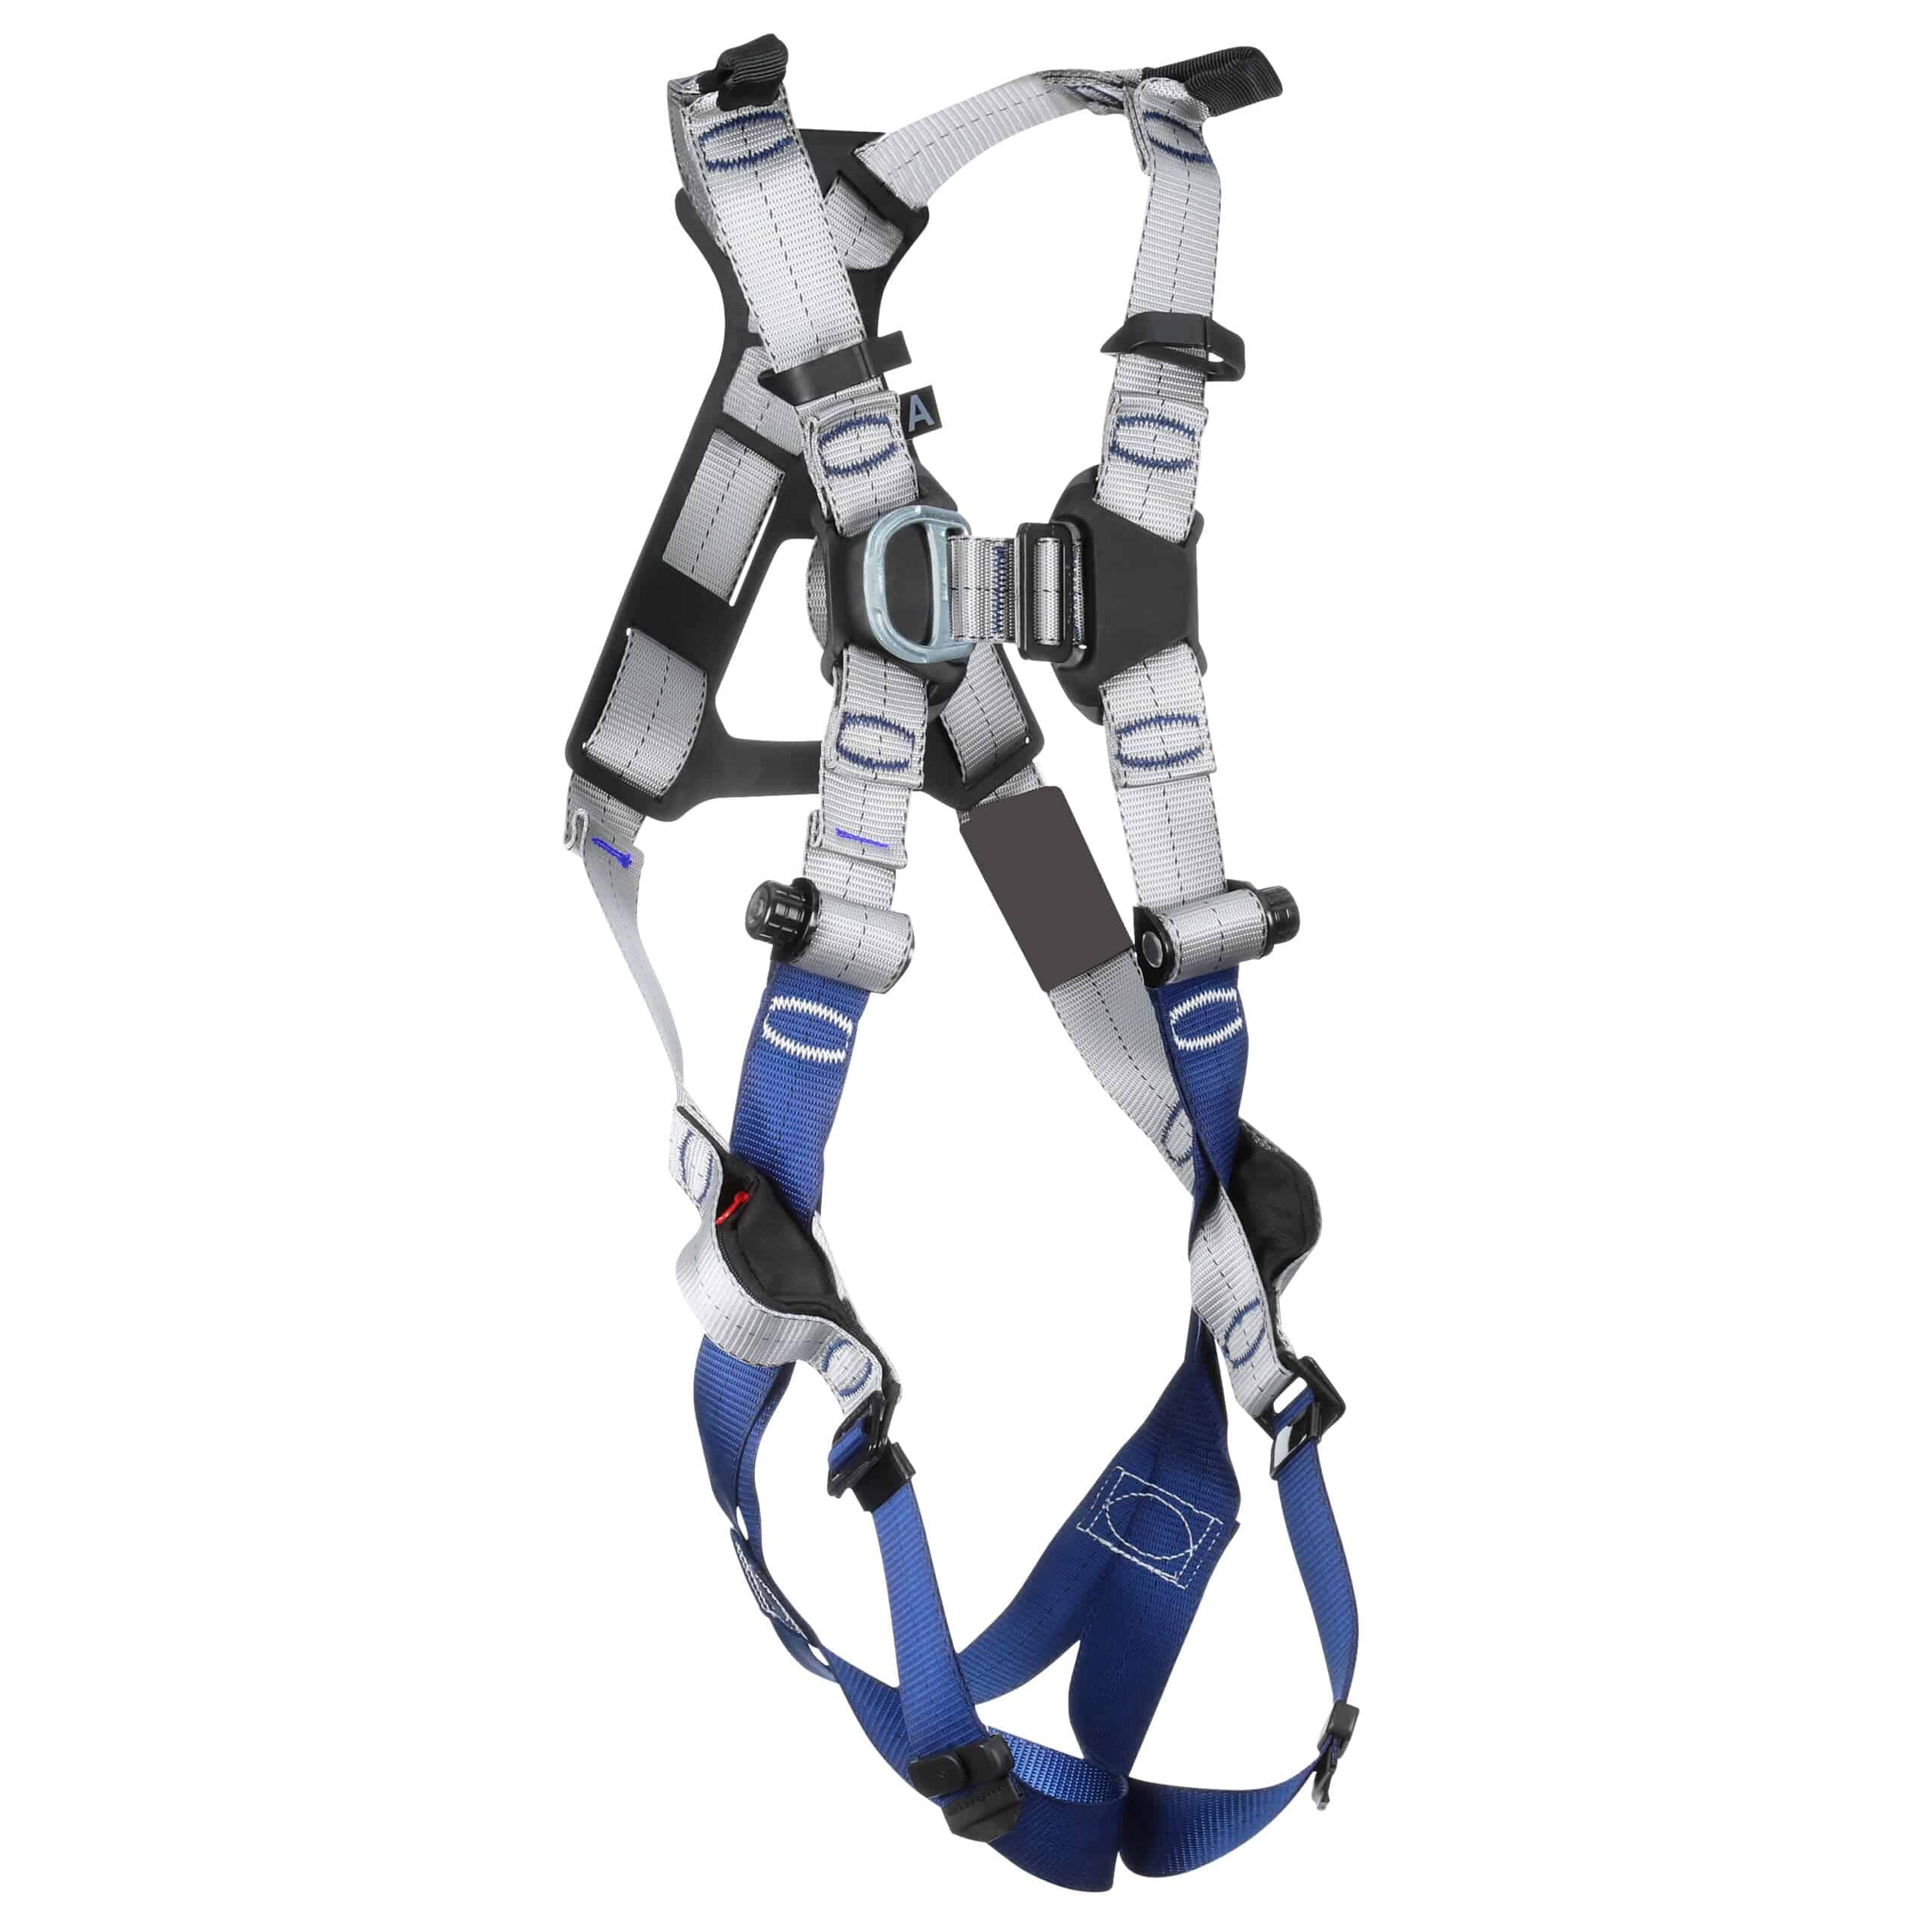 3M DBI SALA ExoFit XE50 Rescue Safety Harness - SecureHeights